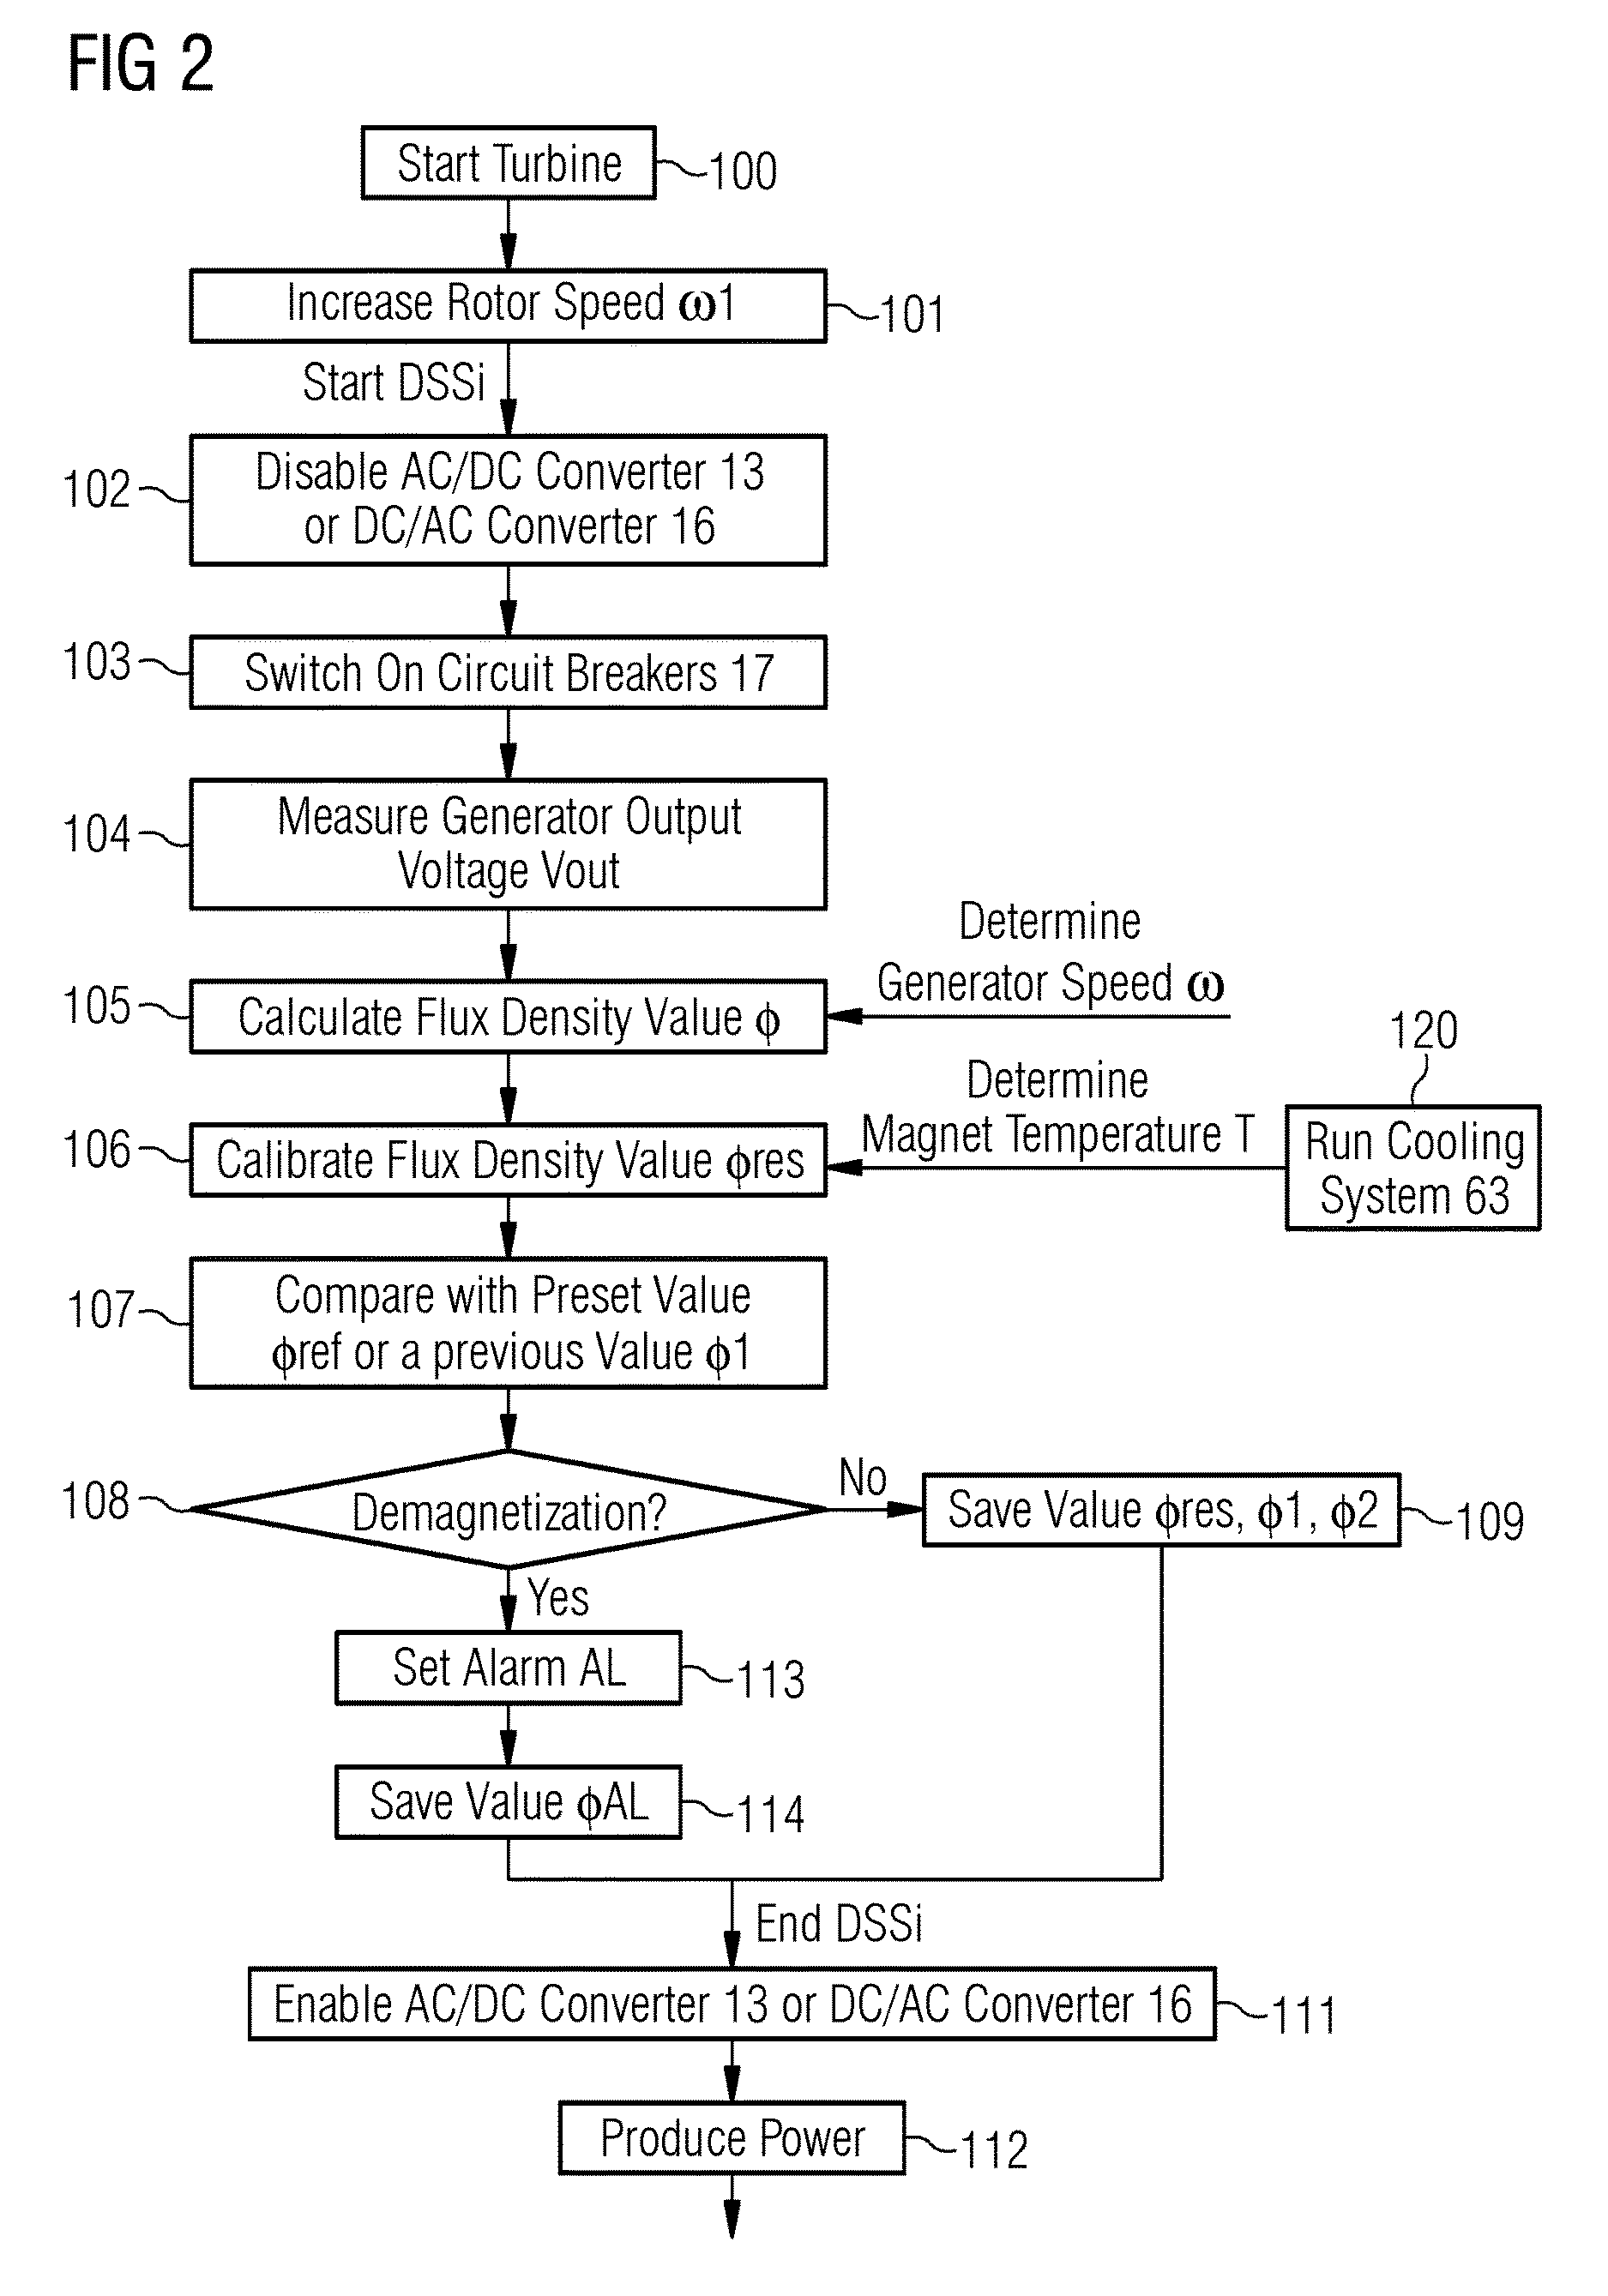 Method to detect or monitor the demagnetization of a magnet